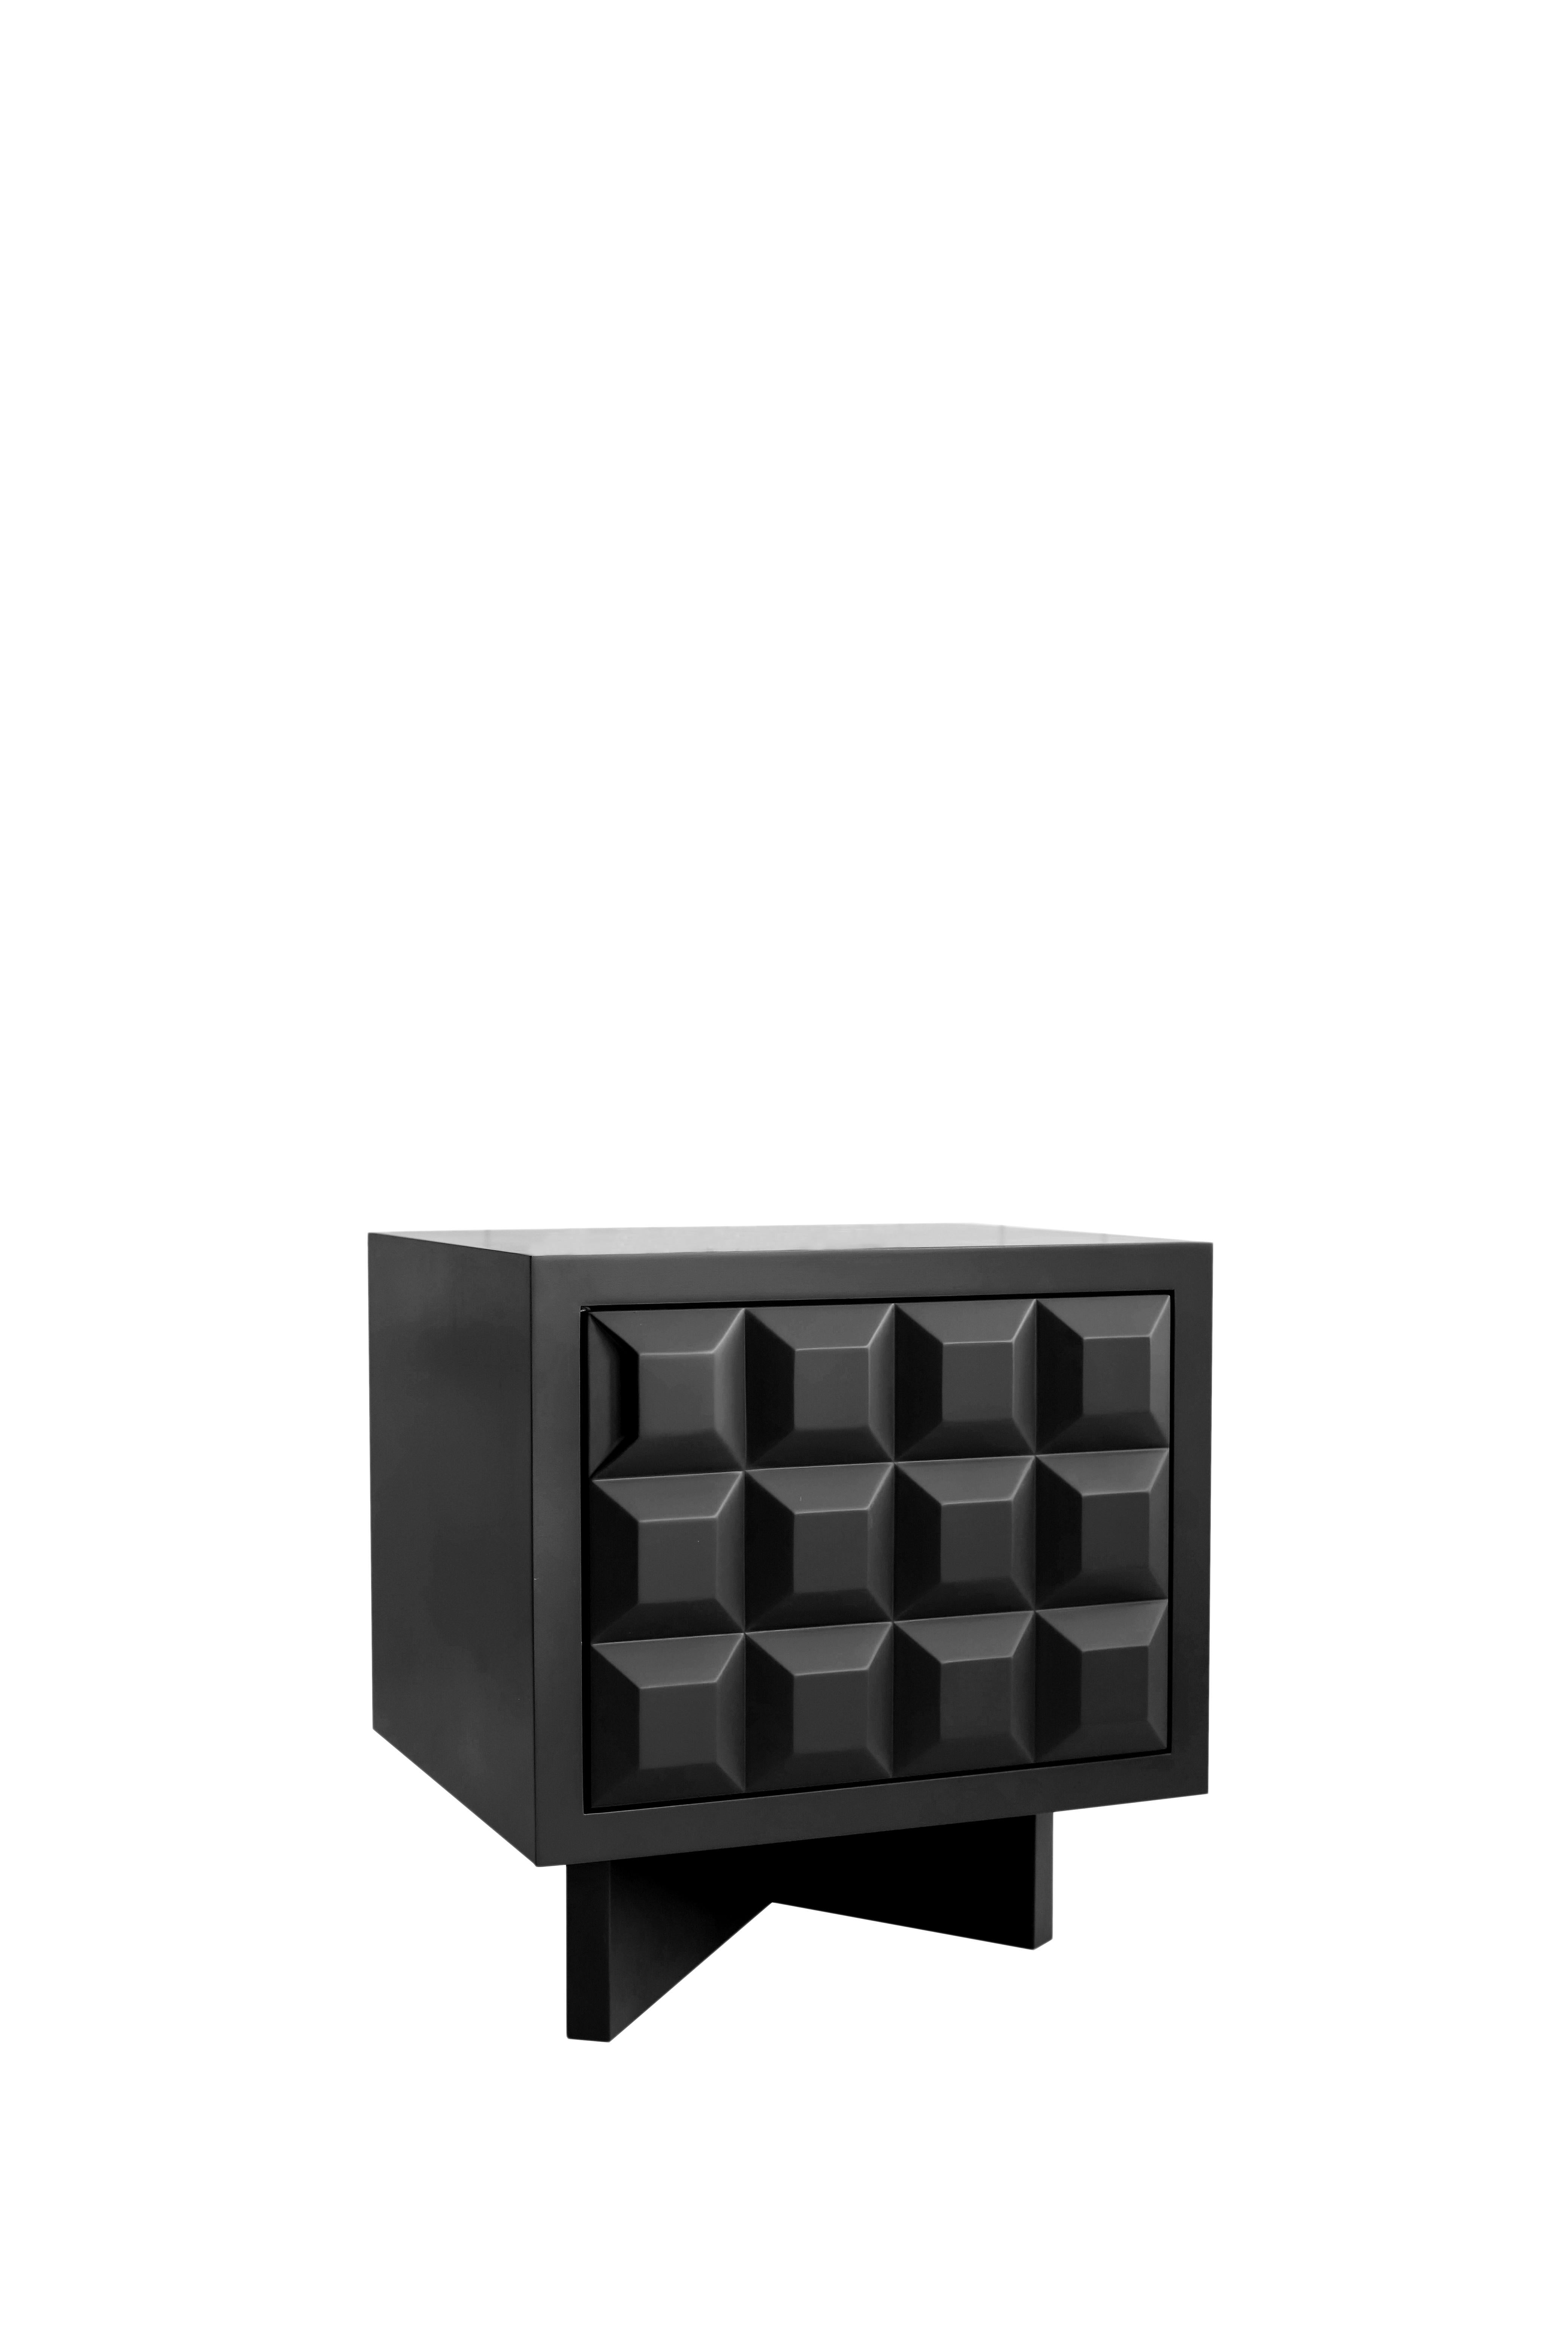 Hand-Carved Karo Nightstand Inspired by Brutalism with Outstanding Look, Black Color For Sale